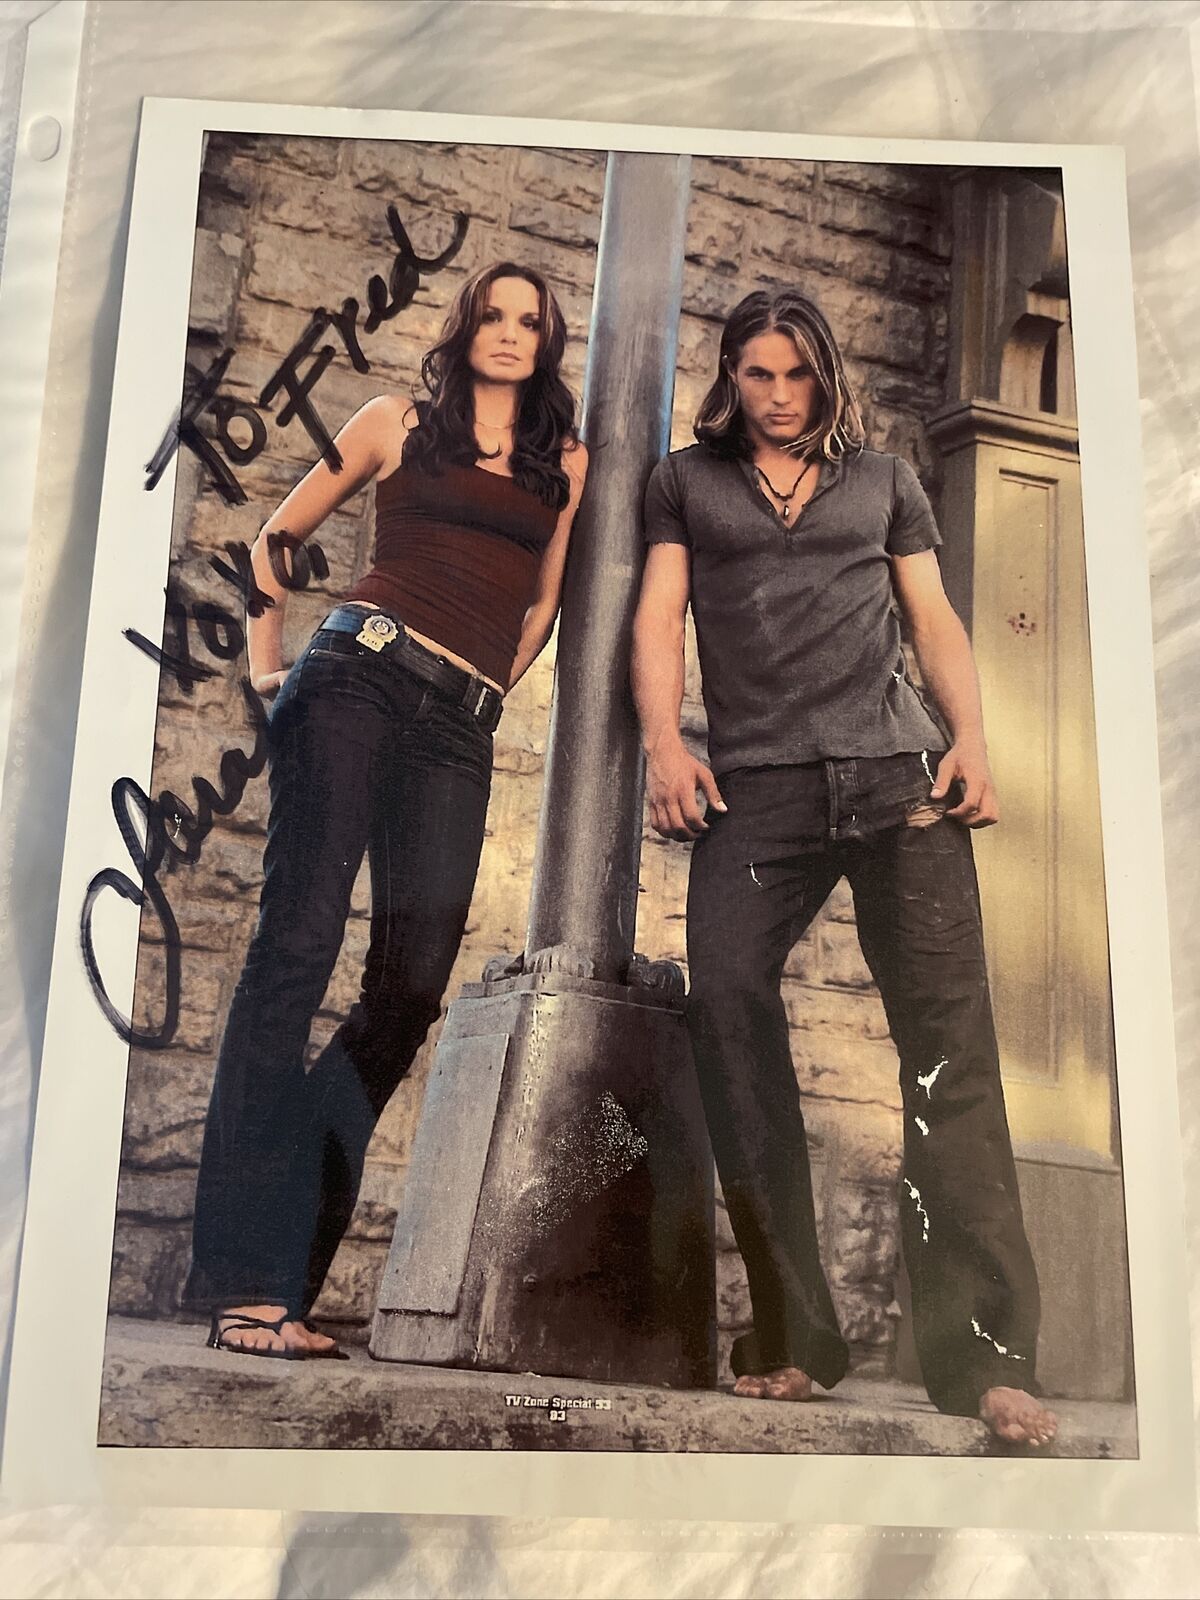 Sarah Wayne Callies Signed In Person 8x10 Photo With Travis Fimmel-